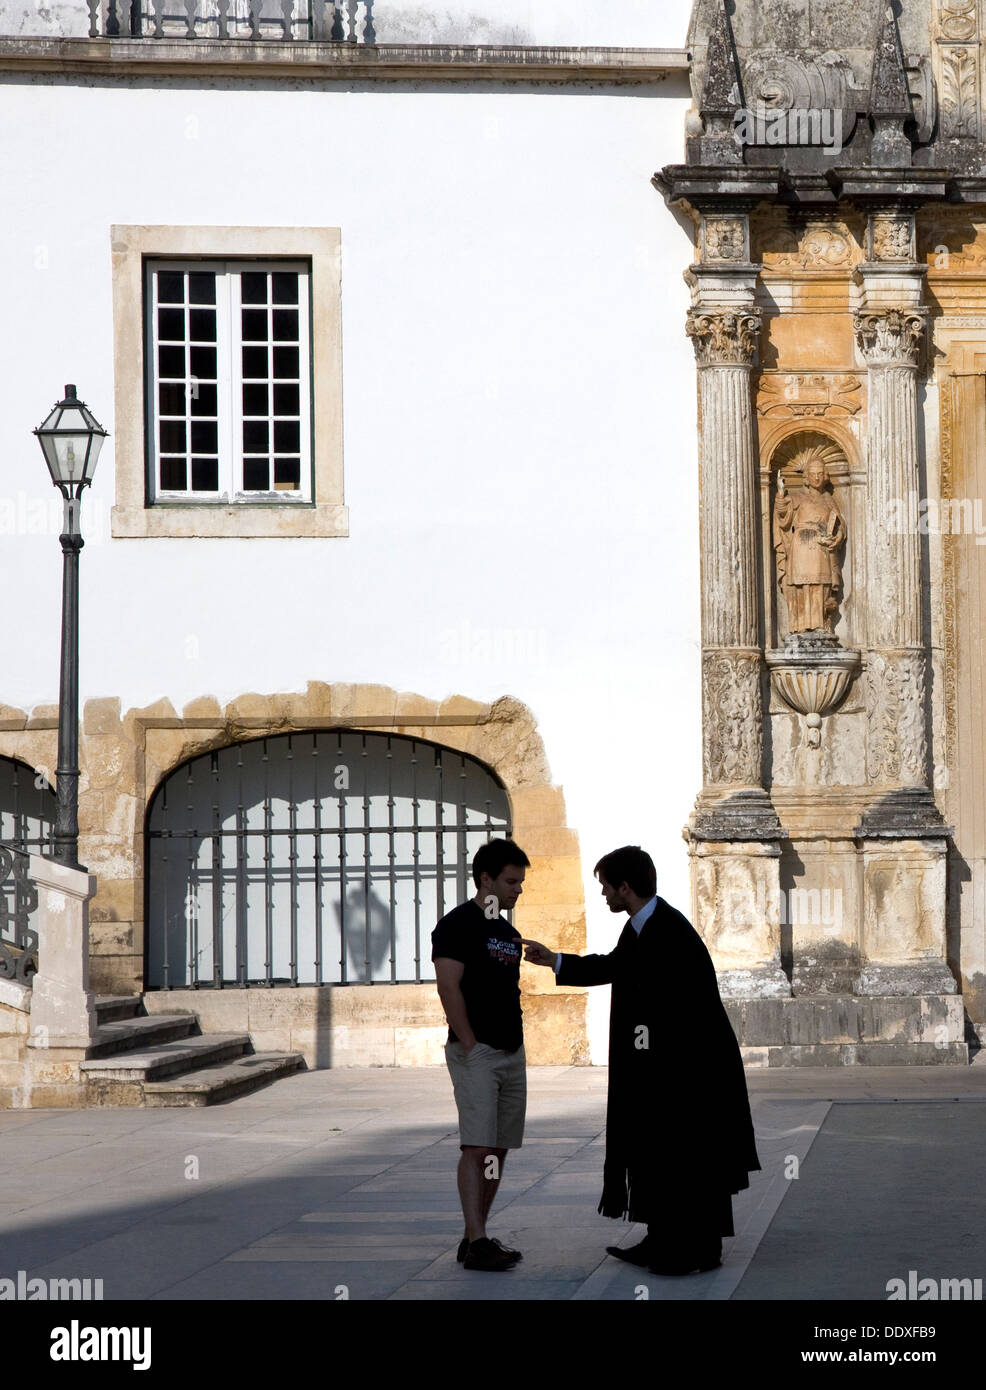 Student being spoken to in Courtyard of the old University of Coimbra, Coimbra, Portugal Stock Photo